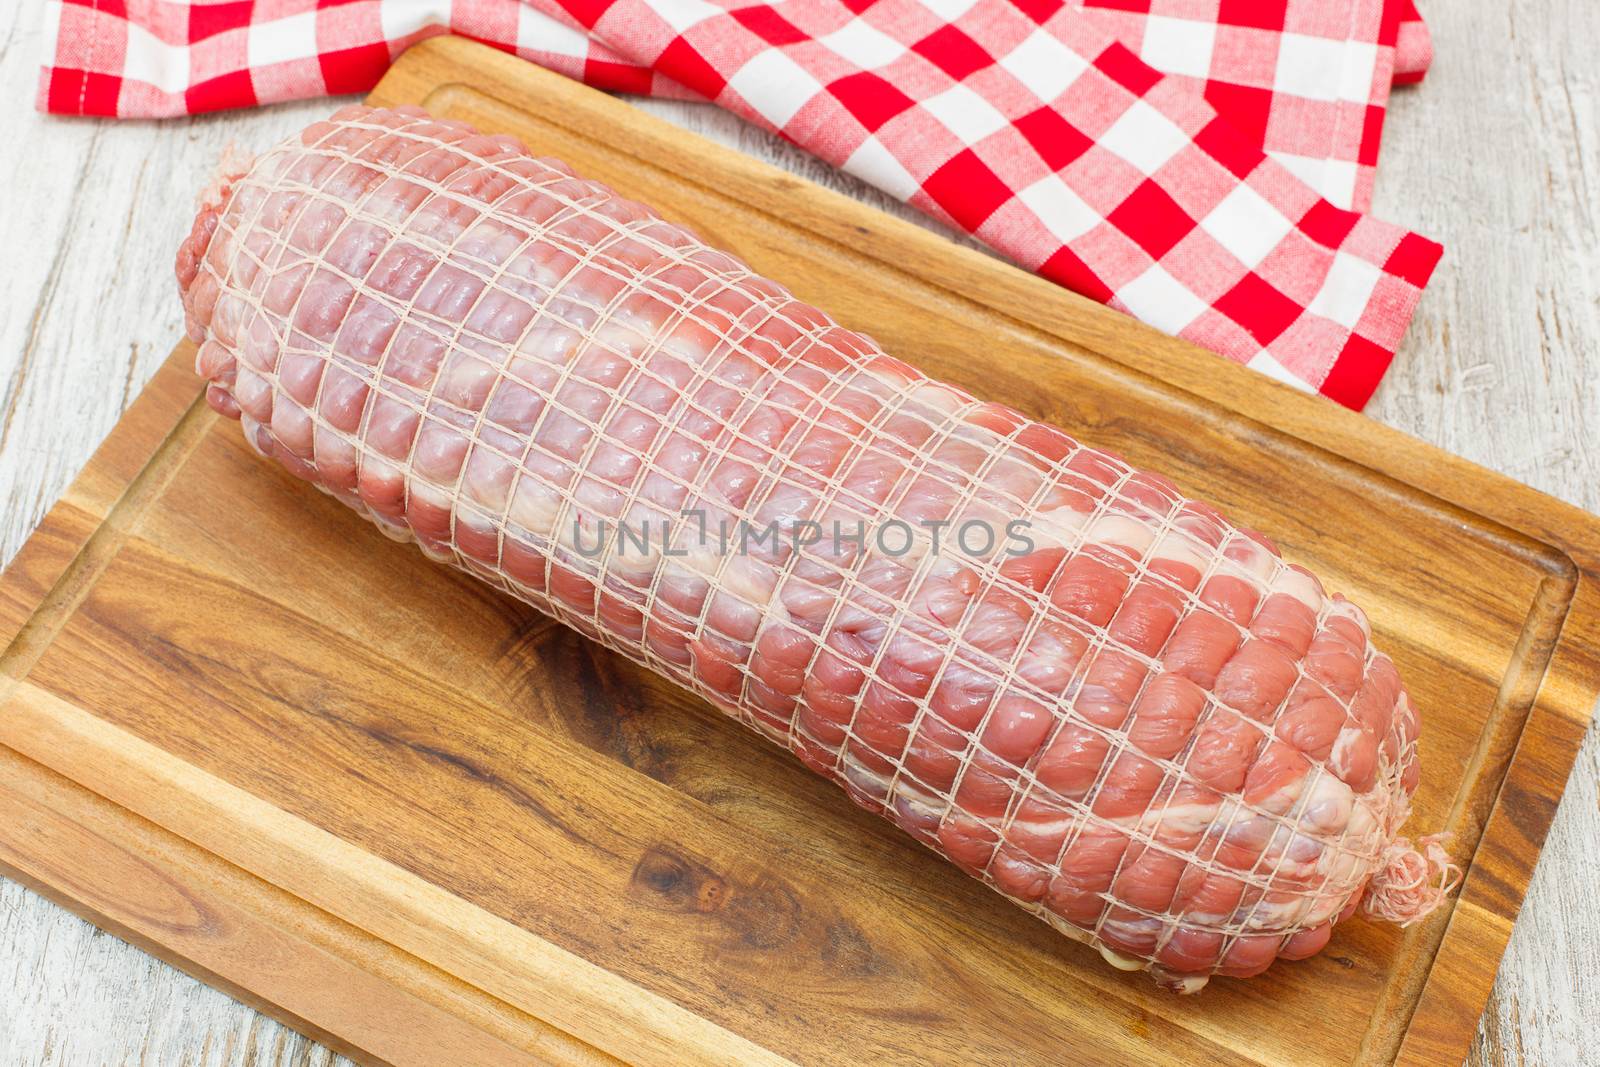 Raw rolled meat enclosed in tied netting. Roast of veal stuffed with bacon, ham and spices, ready to barbecue. Viewed from above